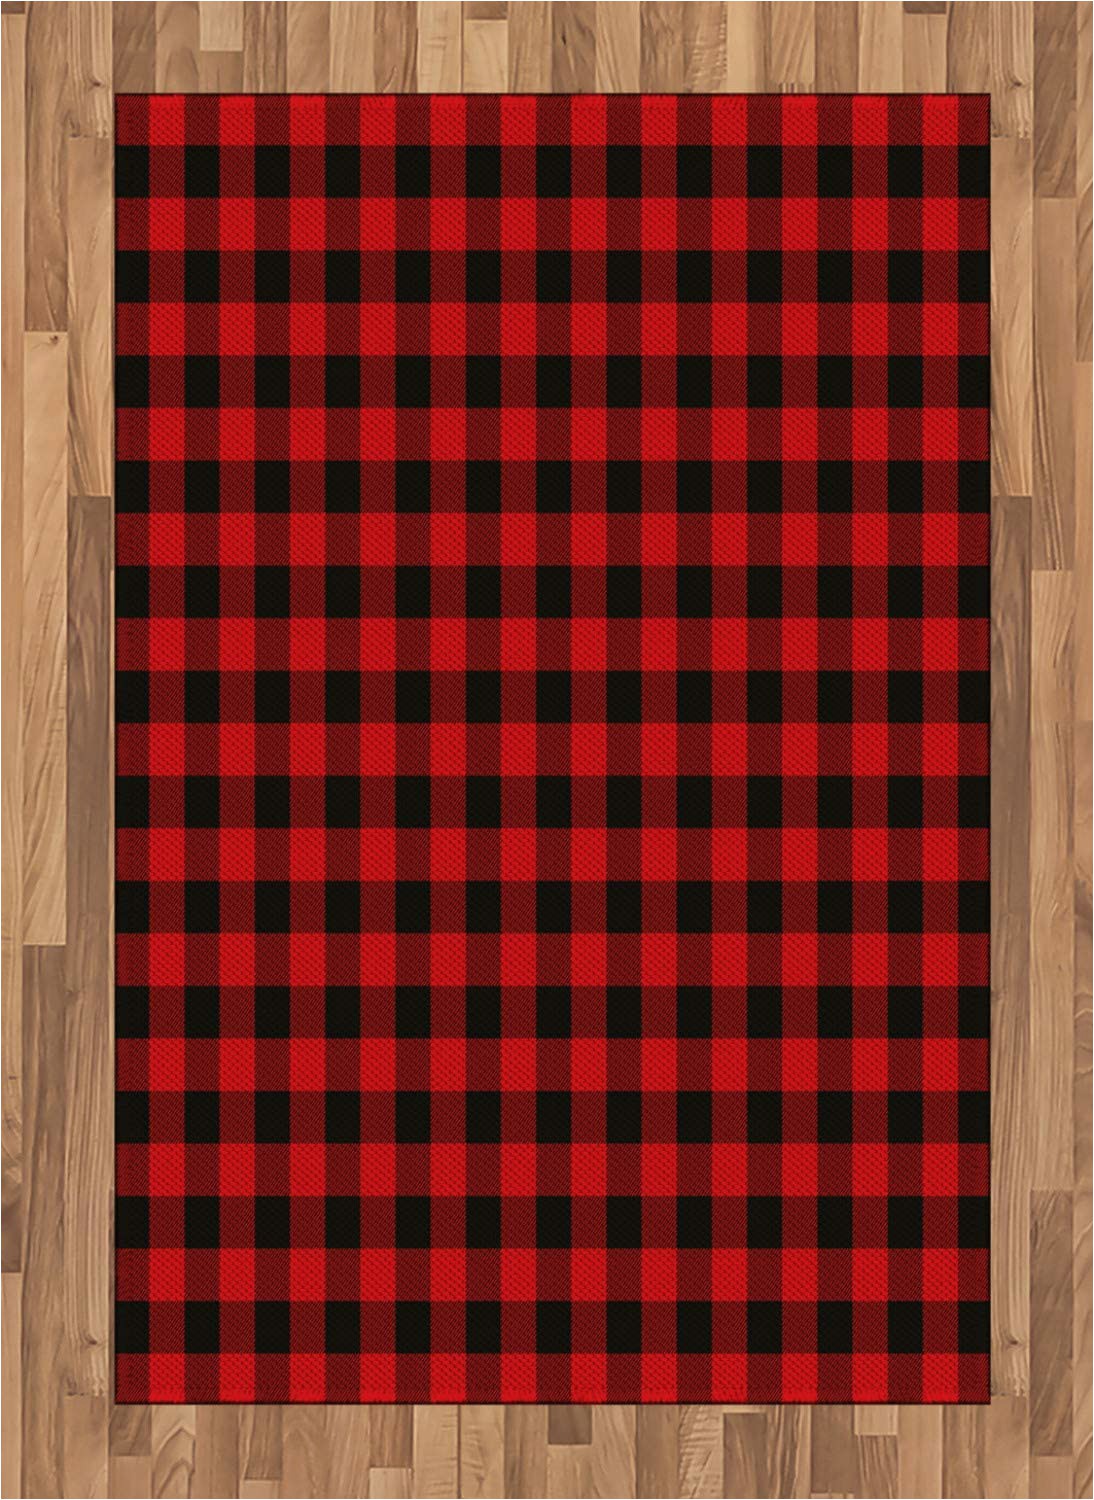 Plaid area Rug Living Room Ambesonne Plaid area Rug Lumberjack Fashion Buffalo Style Checks Pattern Retro Style with Grid Position Flat Woven Accent Rug for Living Room